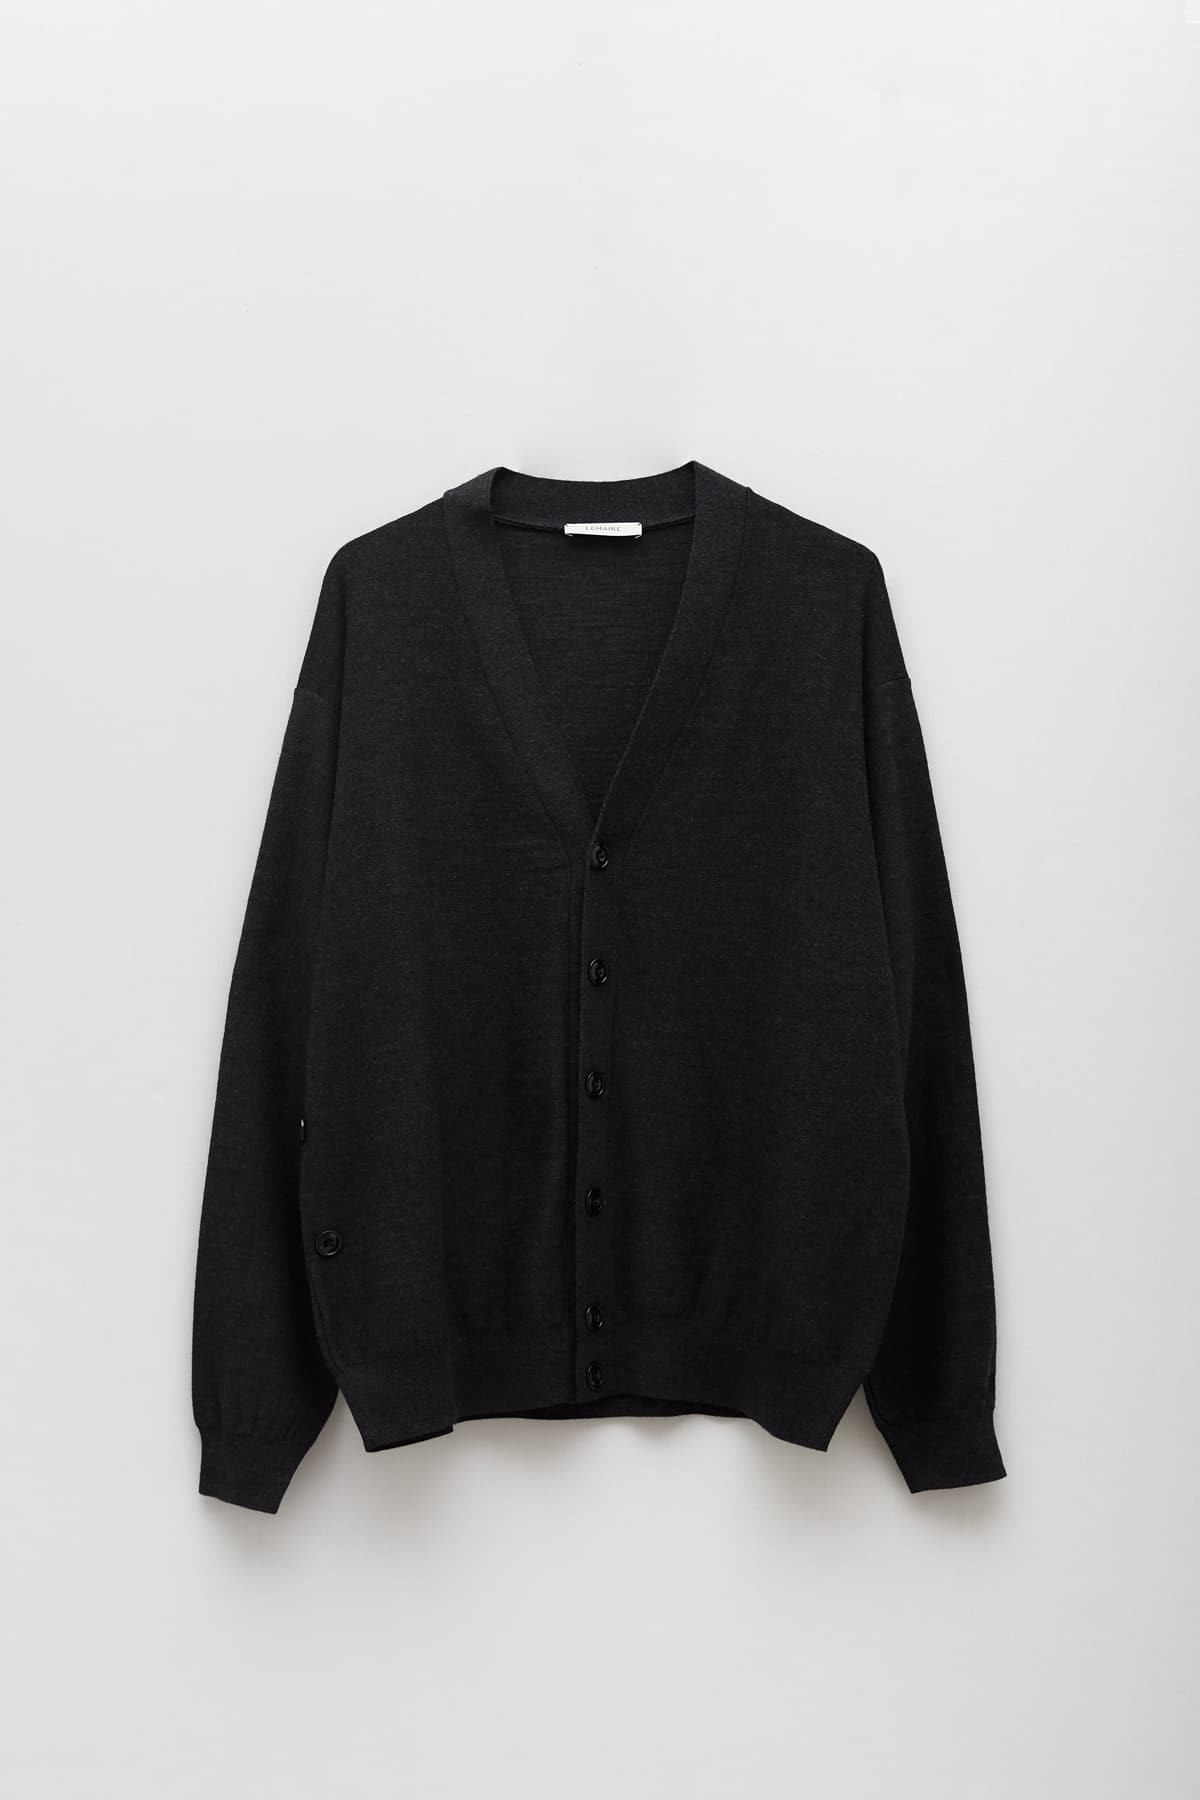 LEMAIRE ANTHRACITE RELAXED TWISTED CARDIGAN IAMNUE